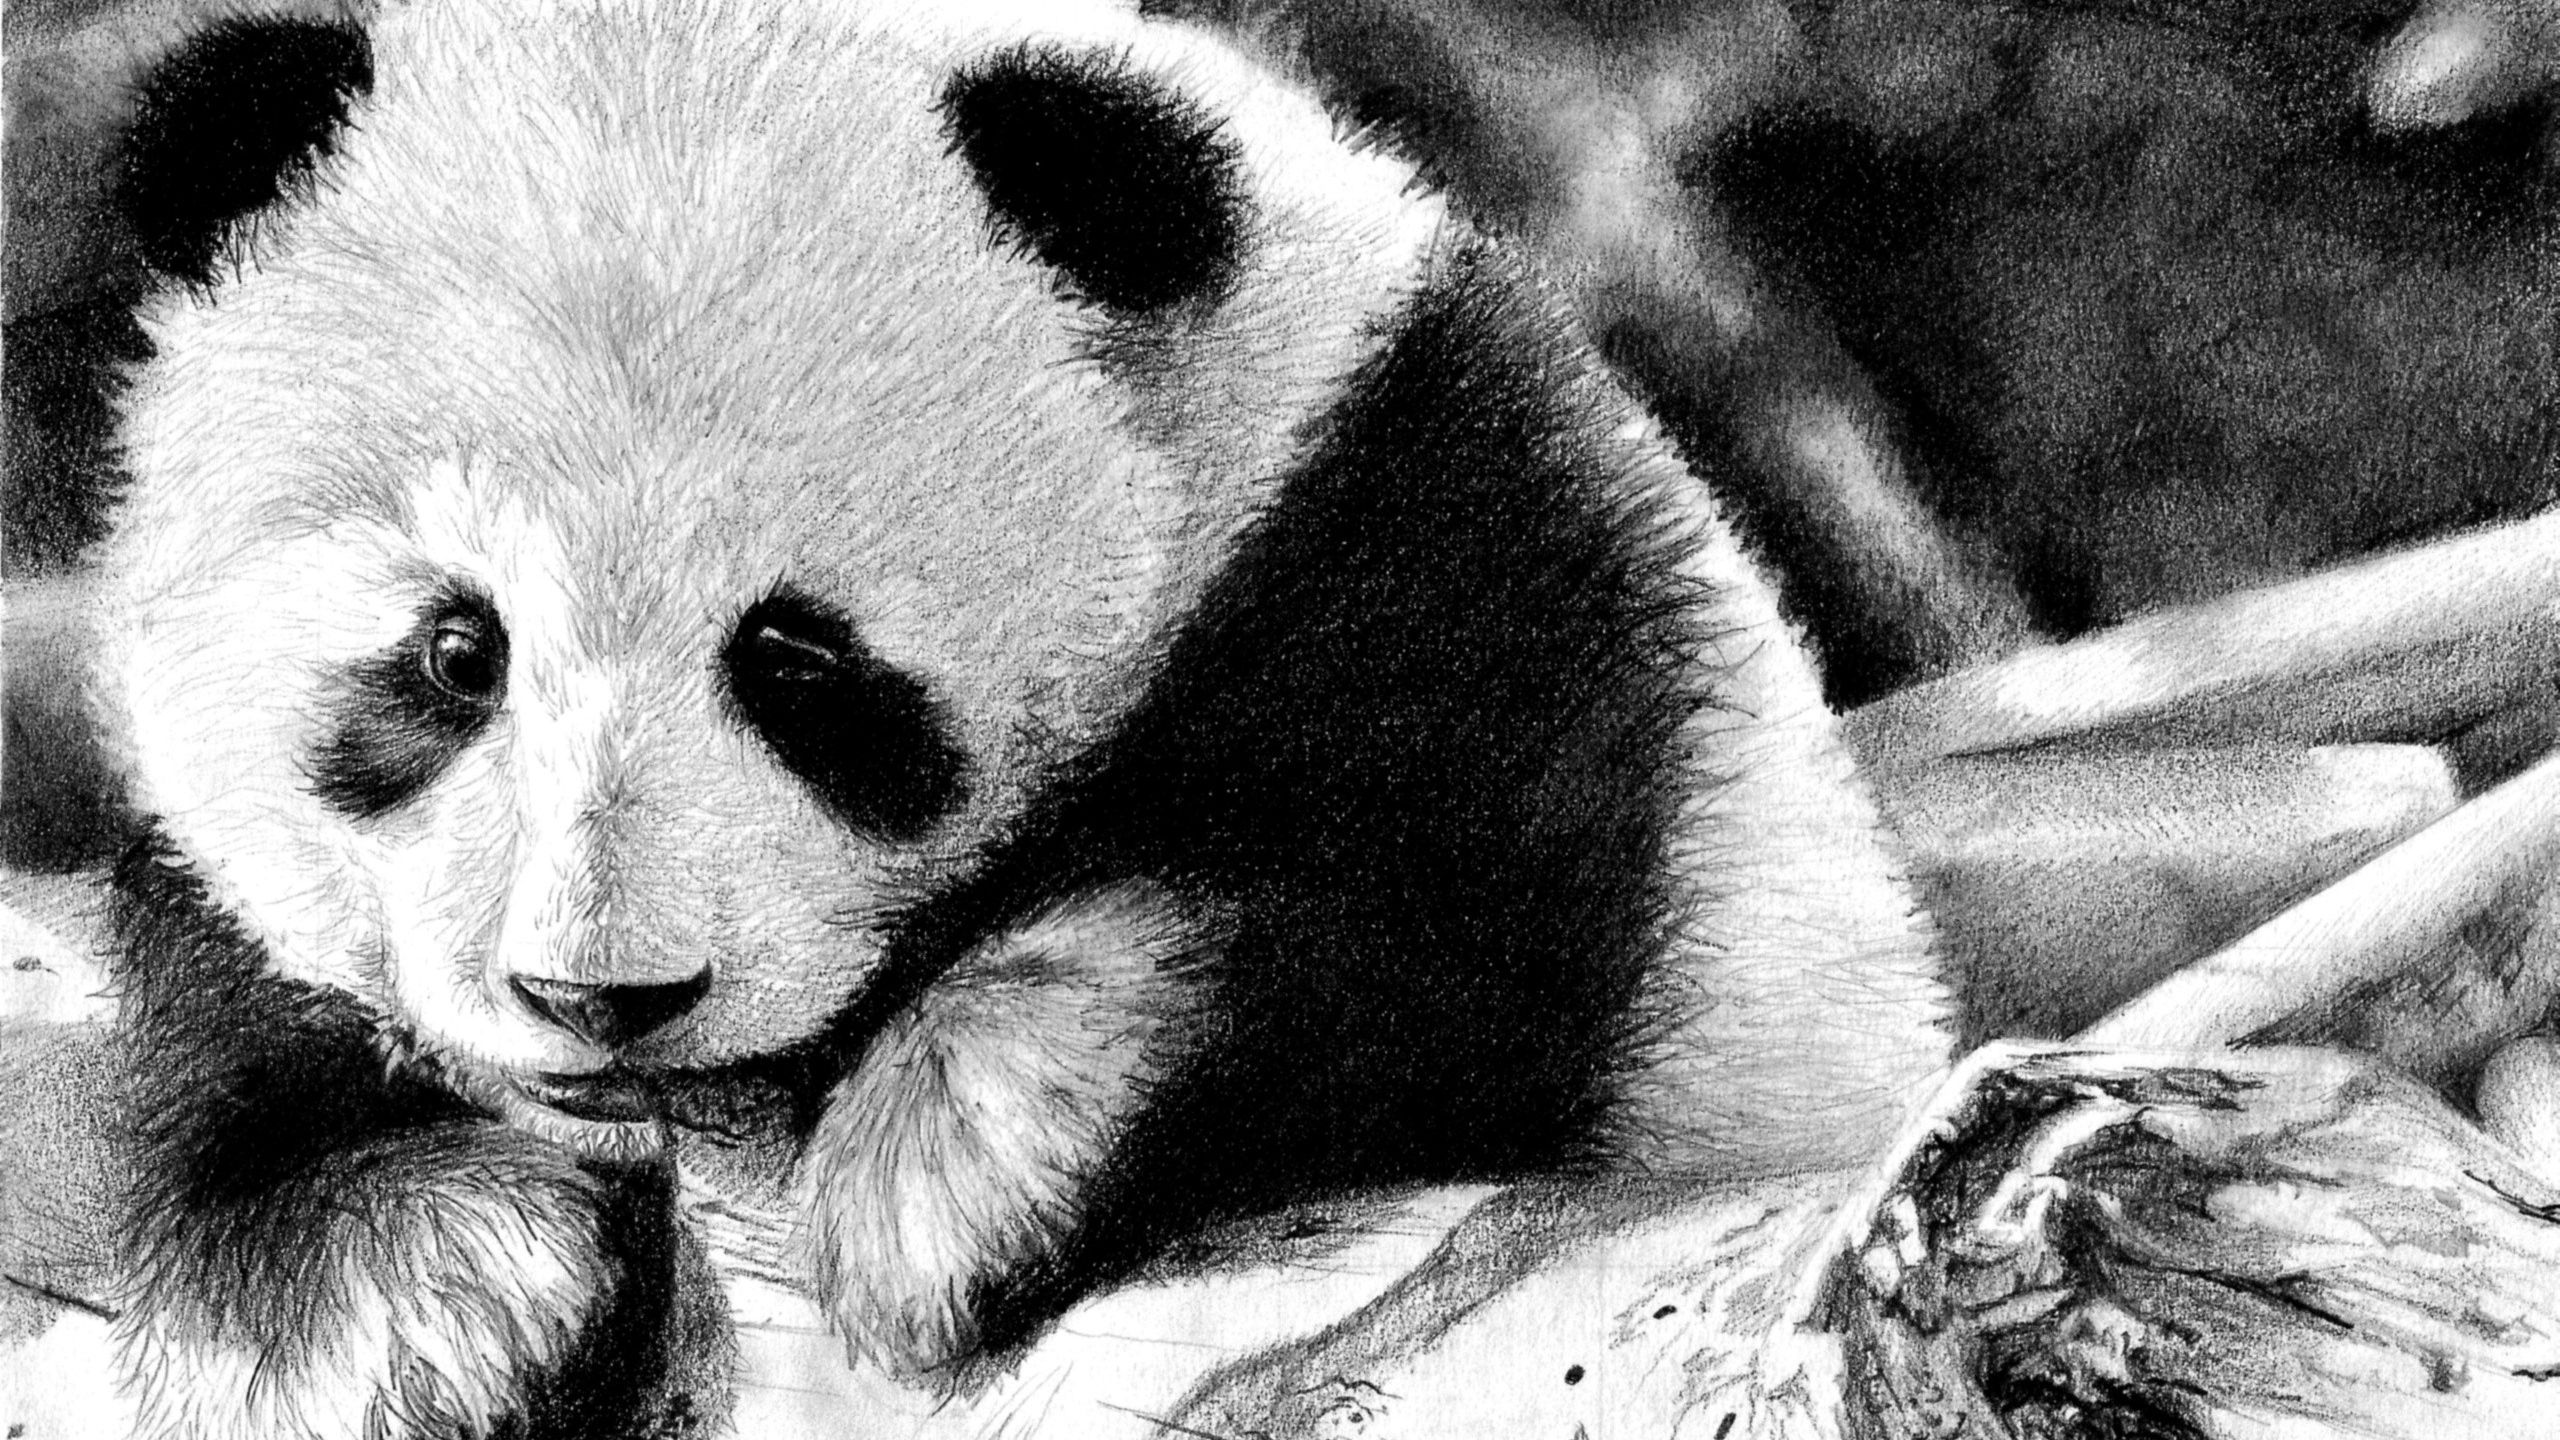 Download wallpaper 2560x1440 panda, color, face, black and white widescreen 16:9 HD background